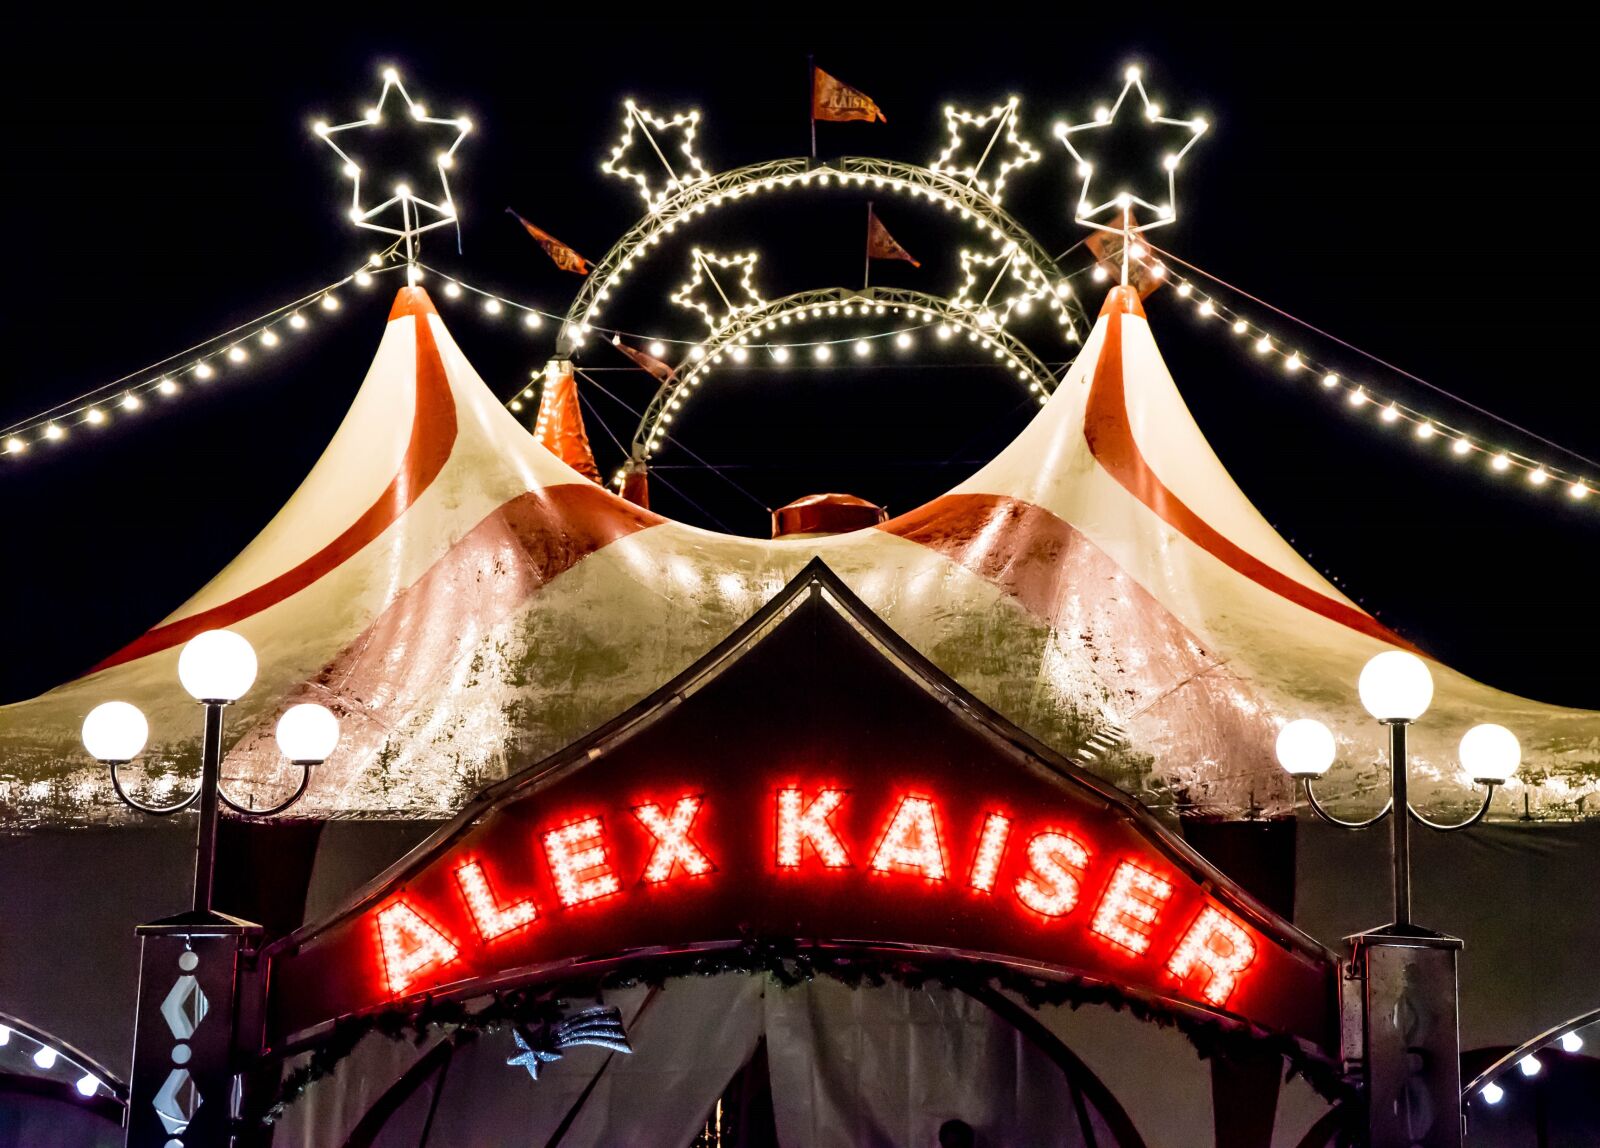 Sony a7 II sample photo. Circus, circus tent, artists photography